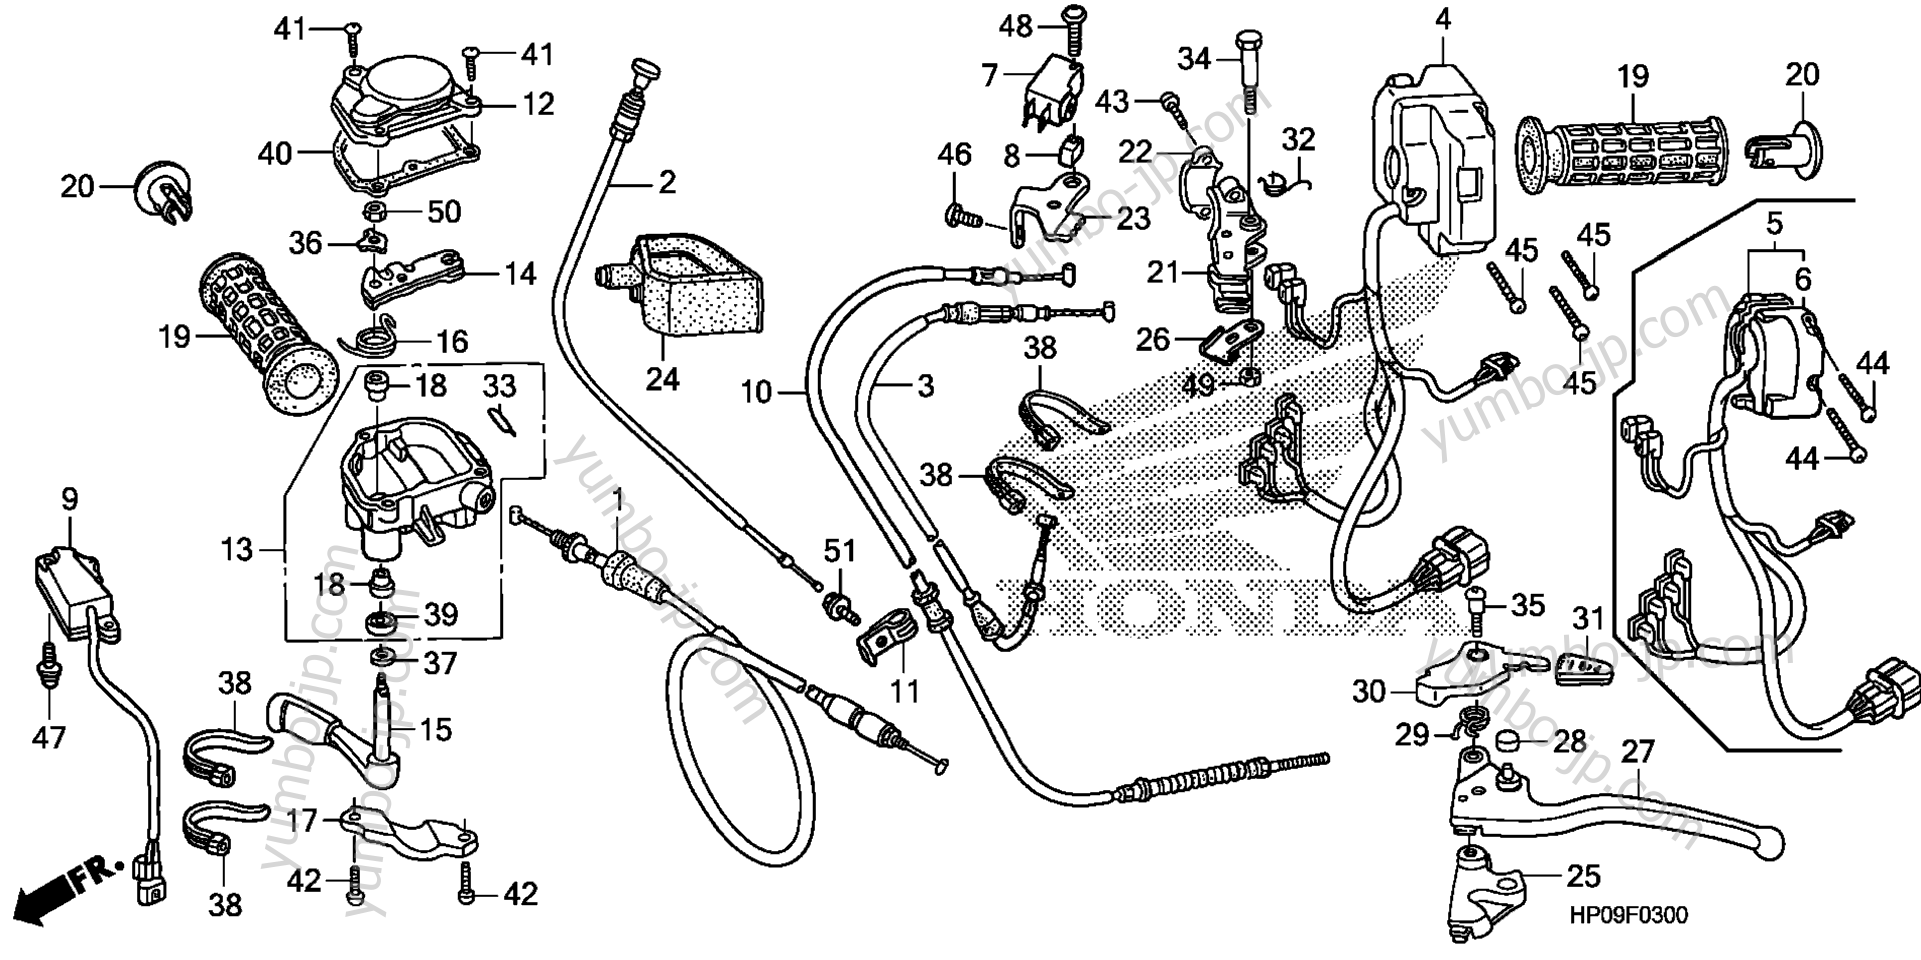 HANDLE LEVER / SWITCH / CABLE for ATVs HONDA TRX500FPE A 2009 year